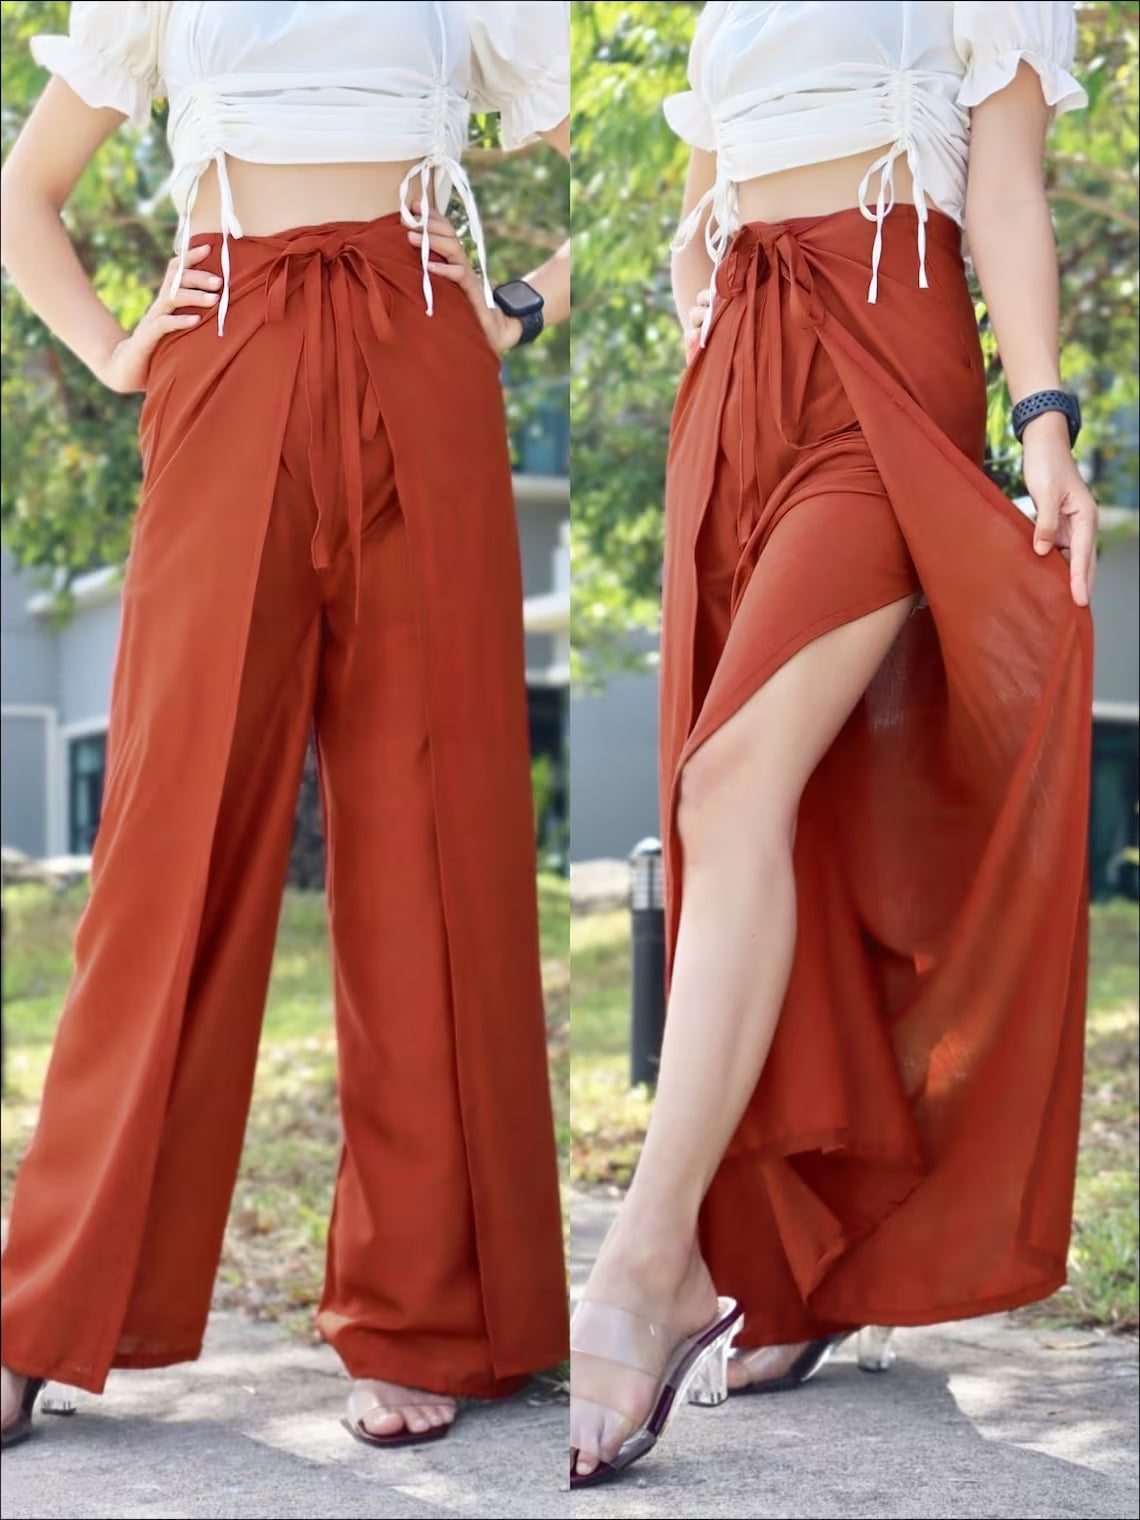 Boho-style burnt orange wrap pants with a white top, displayed in two angles to showcase the versatile and stylish design.